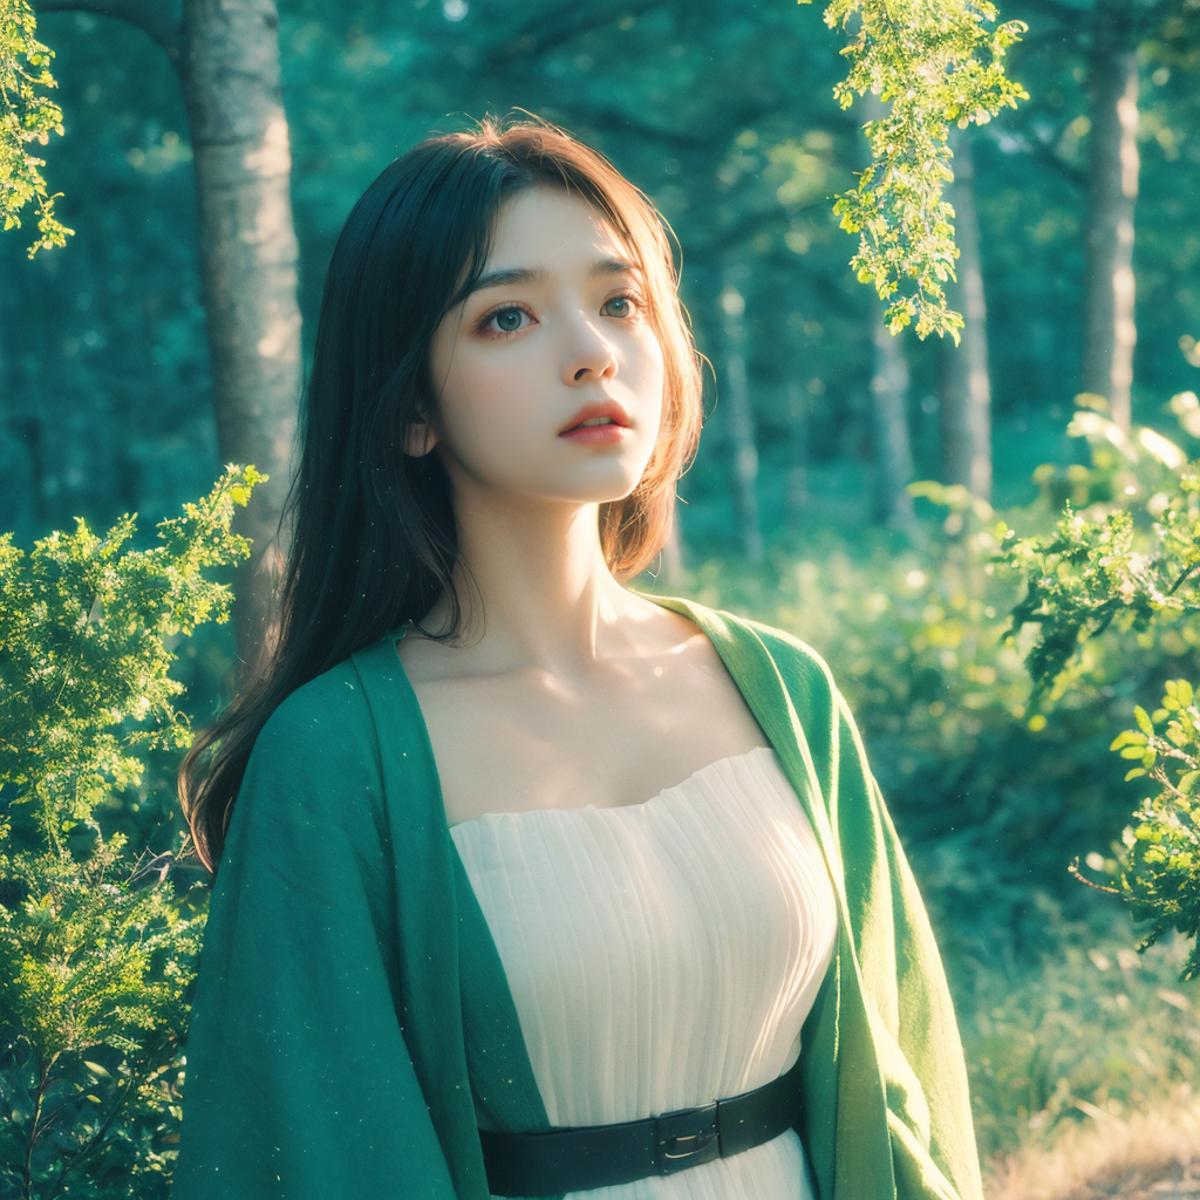 A beautiful young lady wearing a green dress, standing in a forest with trees in the background.